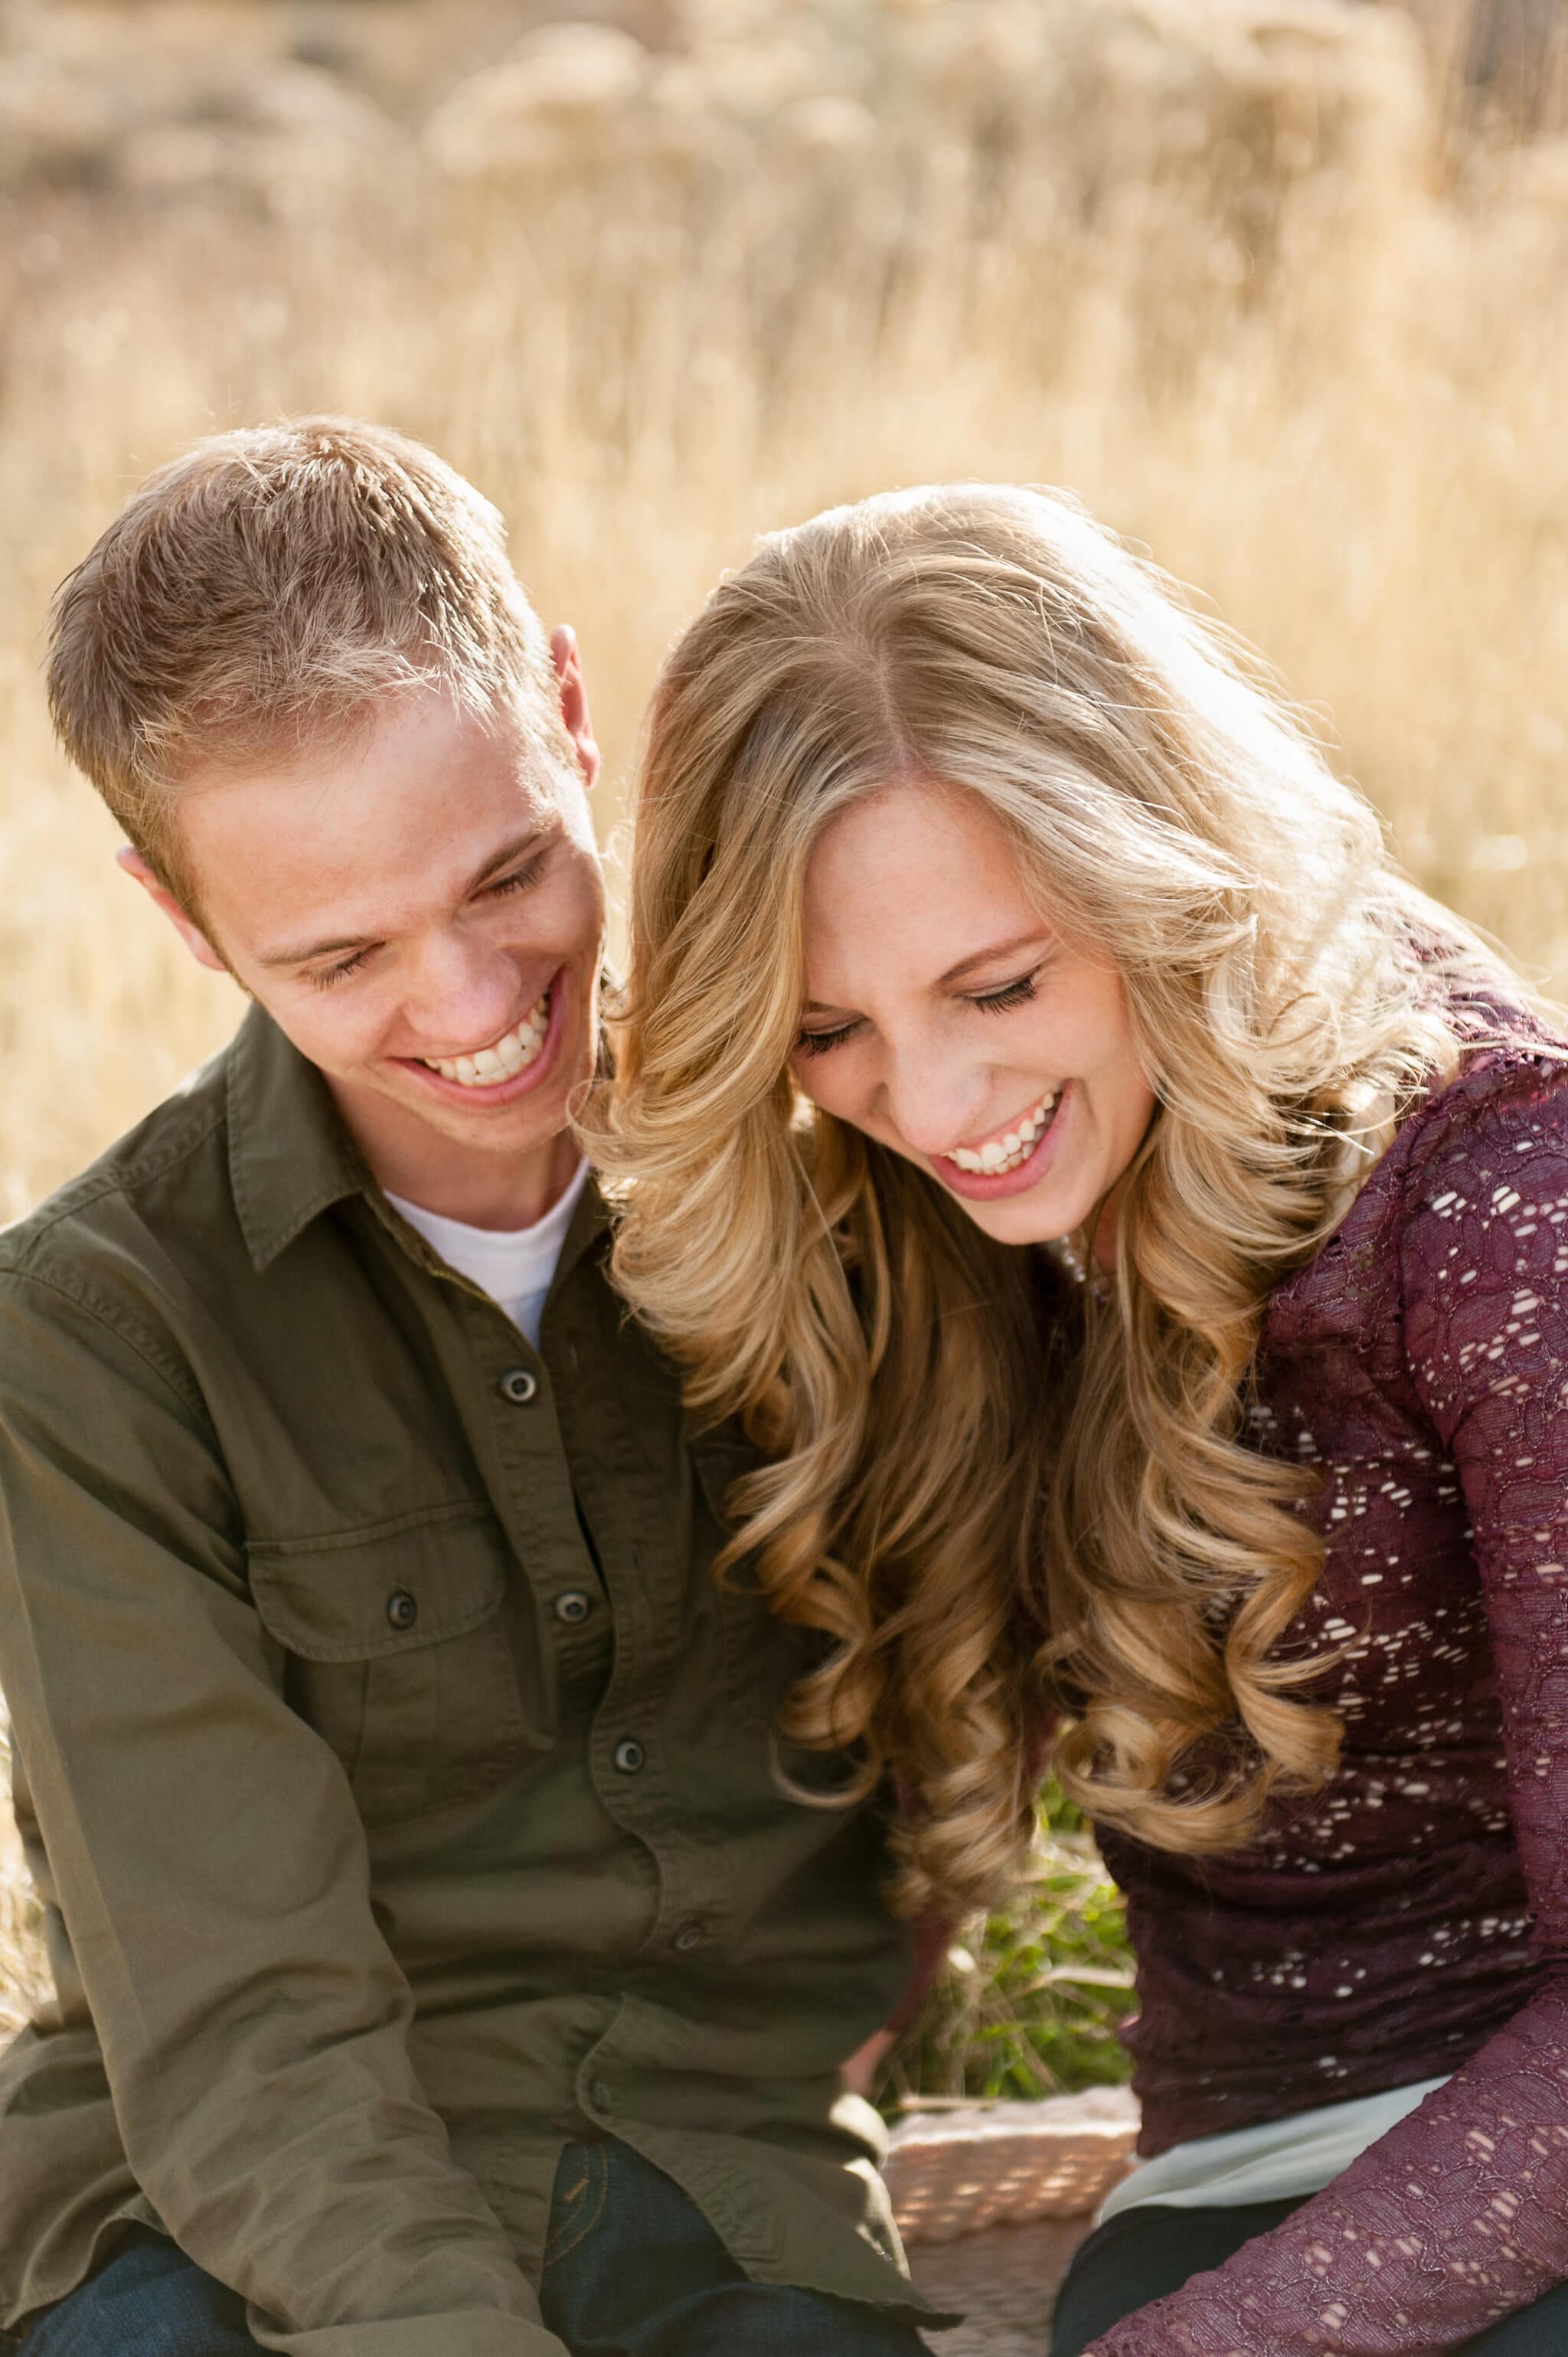 A man looks on as his girlfriend laughs during their engagement photo session.